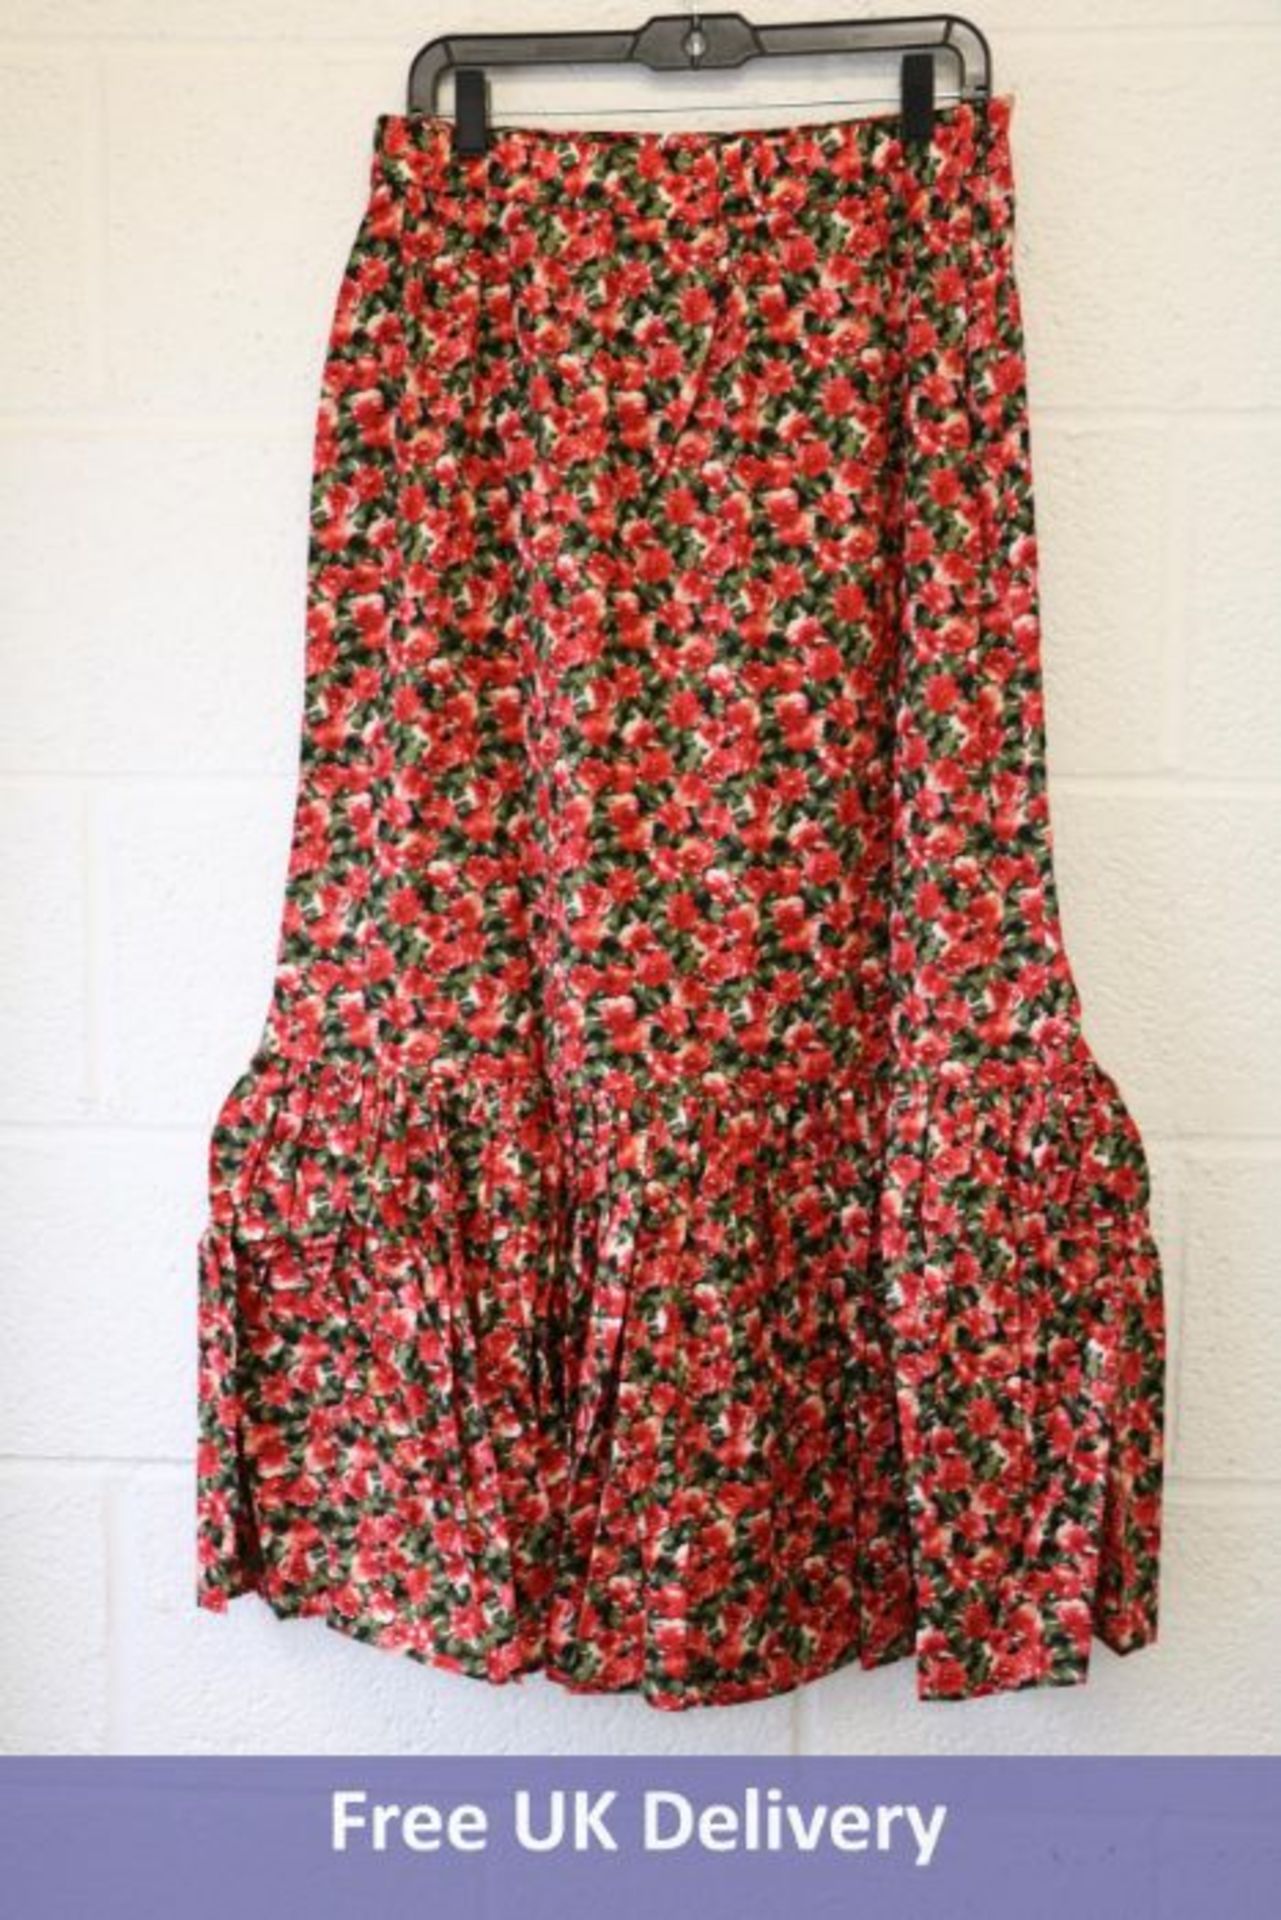 Four items of Ardour London Women's Clothing to include 1x Floral Long Sleeve Dress, Red, Size XL, 1 - Image 2 of 4